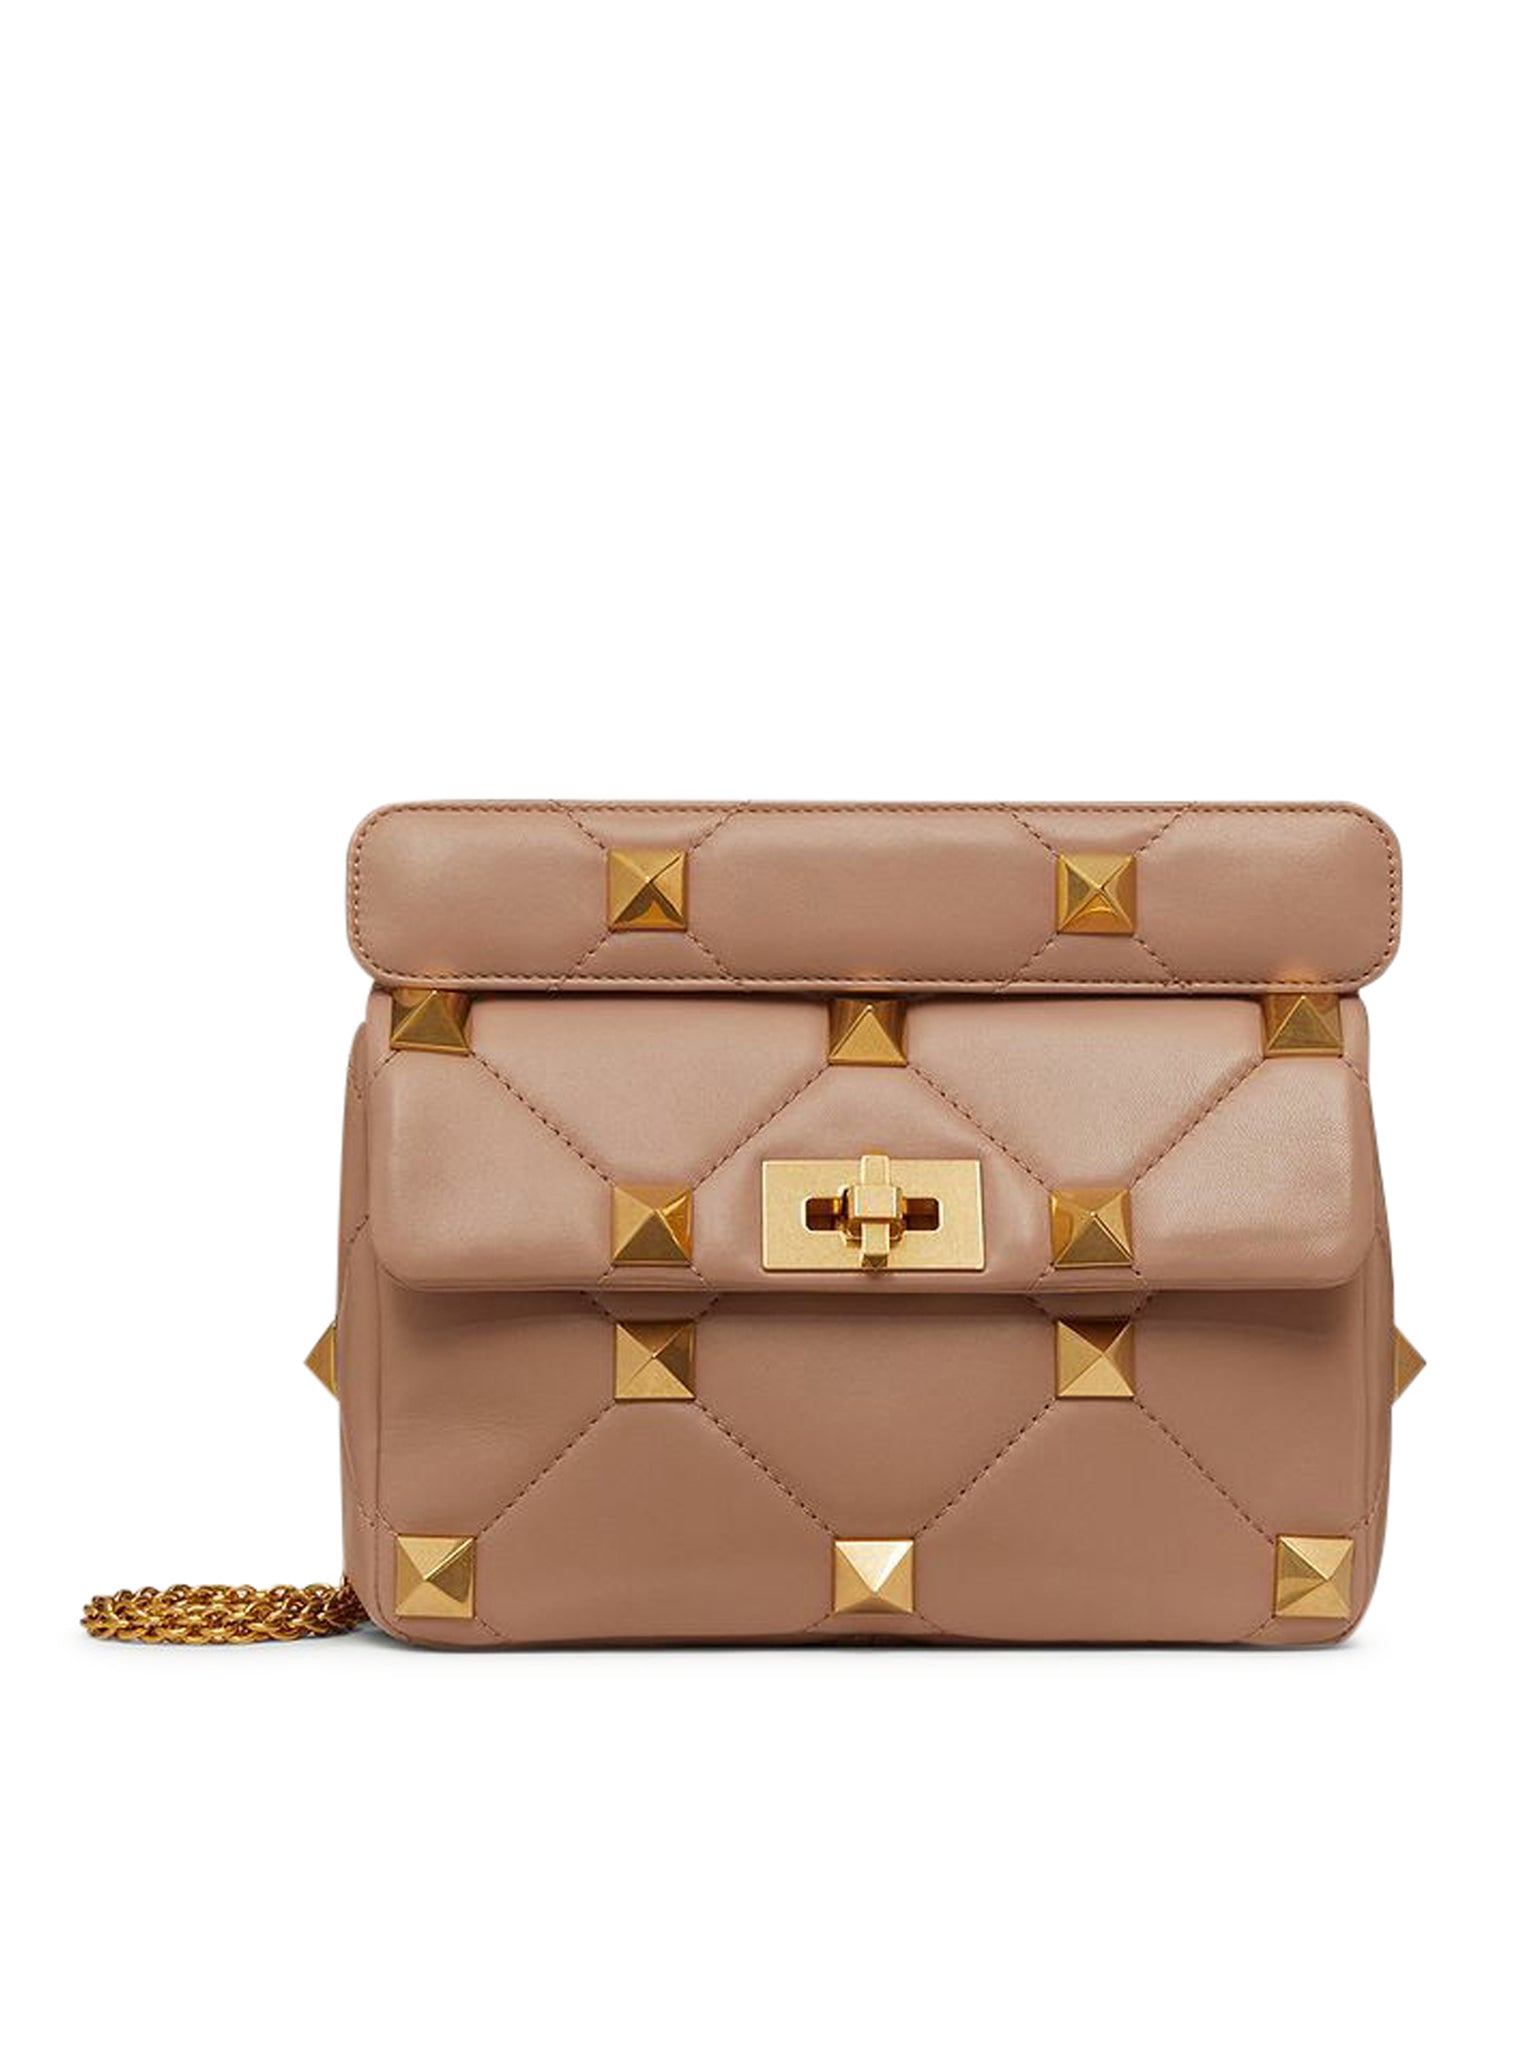 MEDIUM BAG WITH ROMAN STUD THE SHOULDER BAG IN NAPPA CHAIN